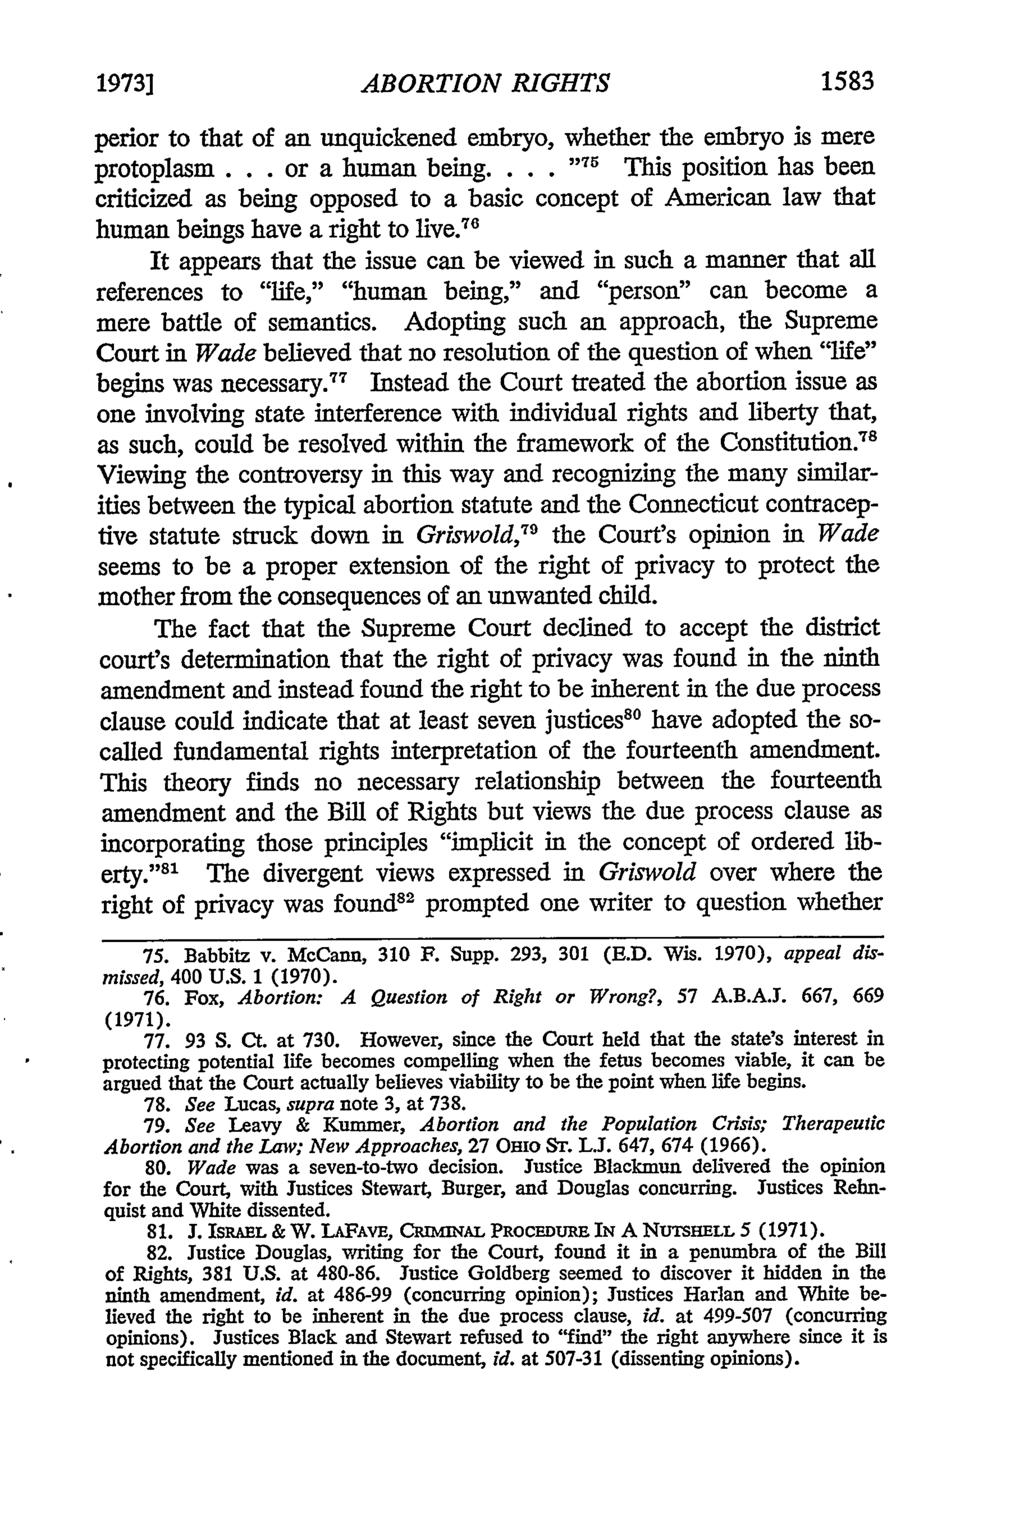 1973] ABORTION RIGHTS 1583 perior to that of an unquickened embryo, whether the embryo is mere protoplasm... or a human being.